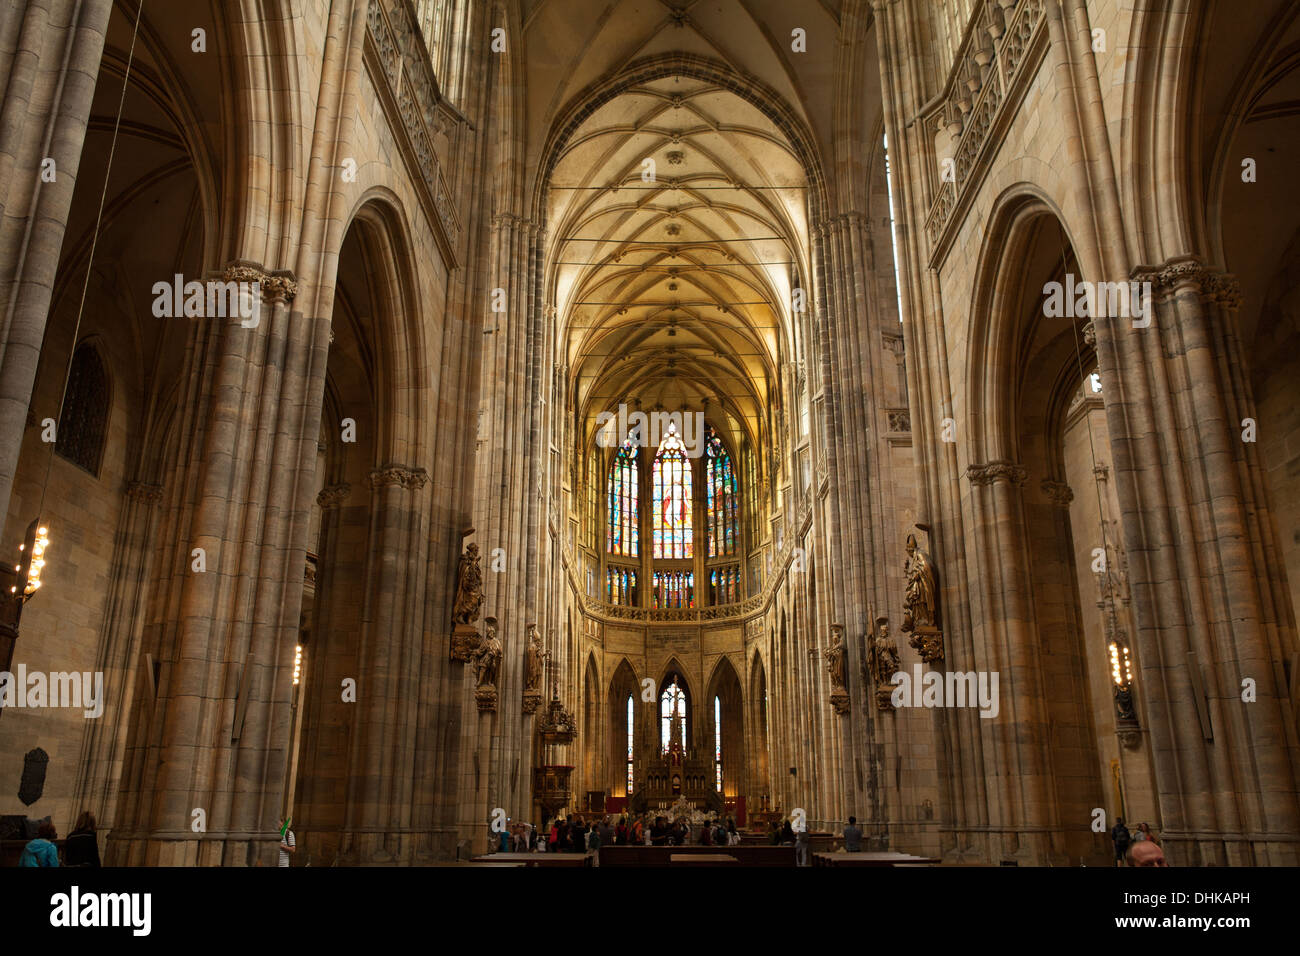 The interior of the Metropolitan Cathedral of Saints Vitus in Prague. This cathedral is a prominent example of Gothic architecture. Stock Photo